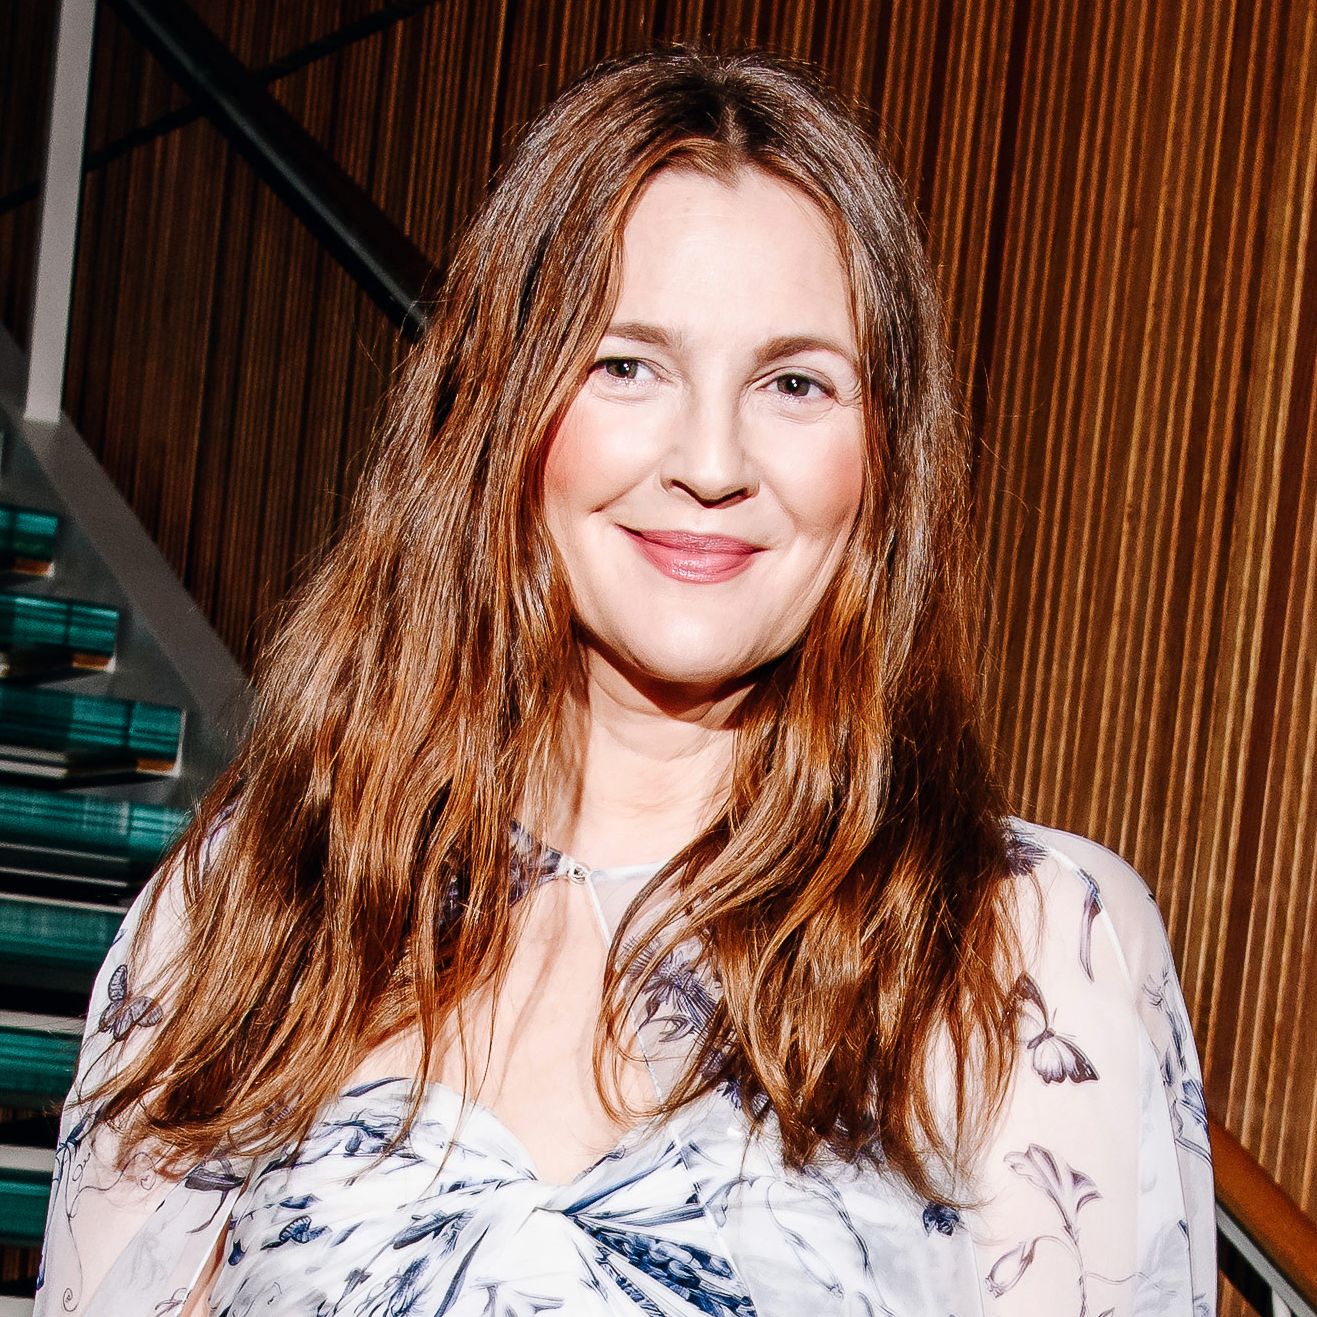 Drew Barrymore Bisexual Nude - ReneÃ© Rapp Protects Drew Barrymore While Rushed Off Stage